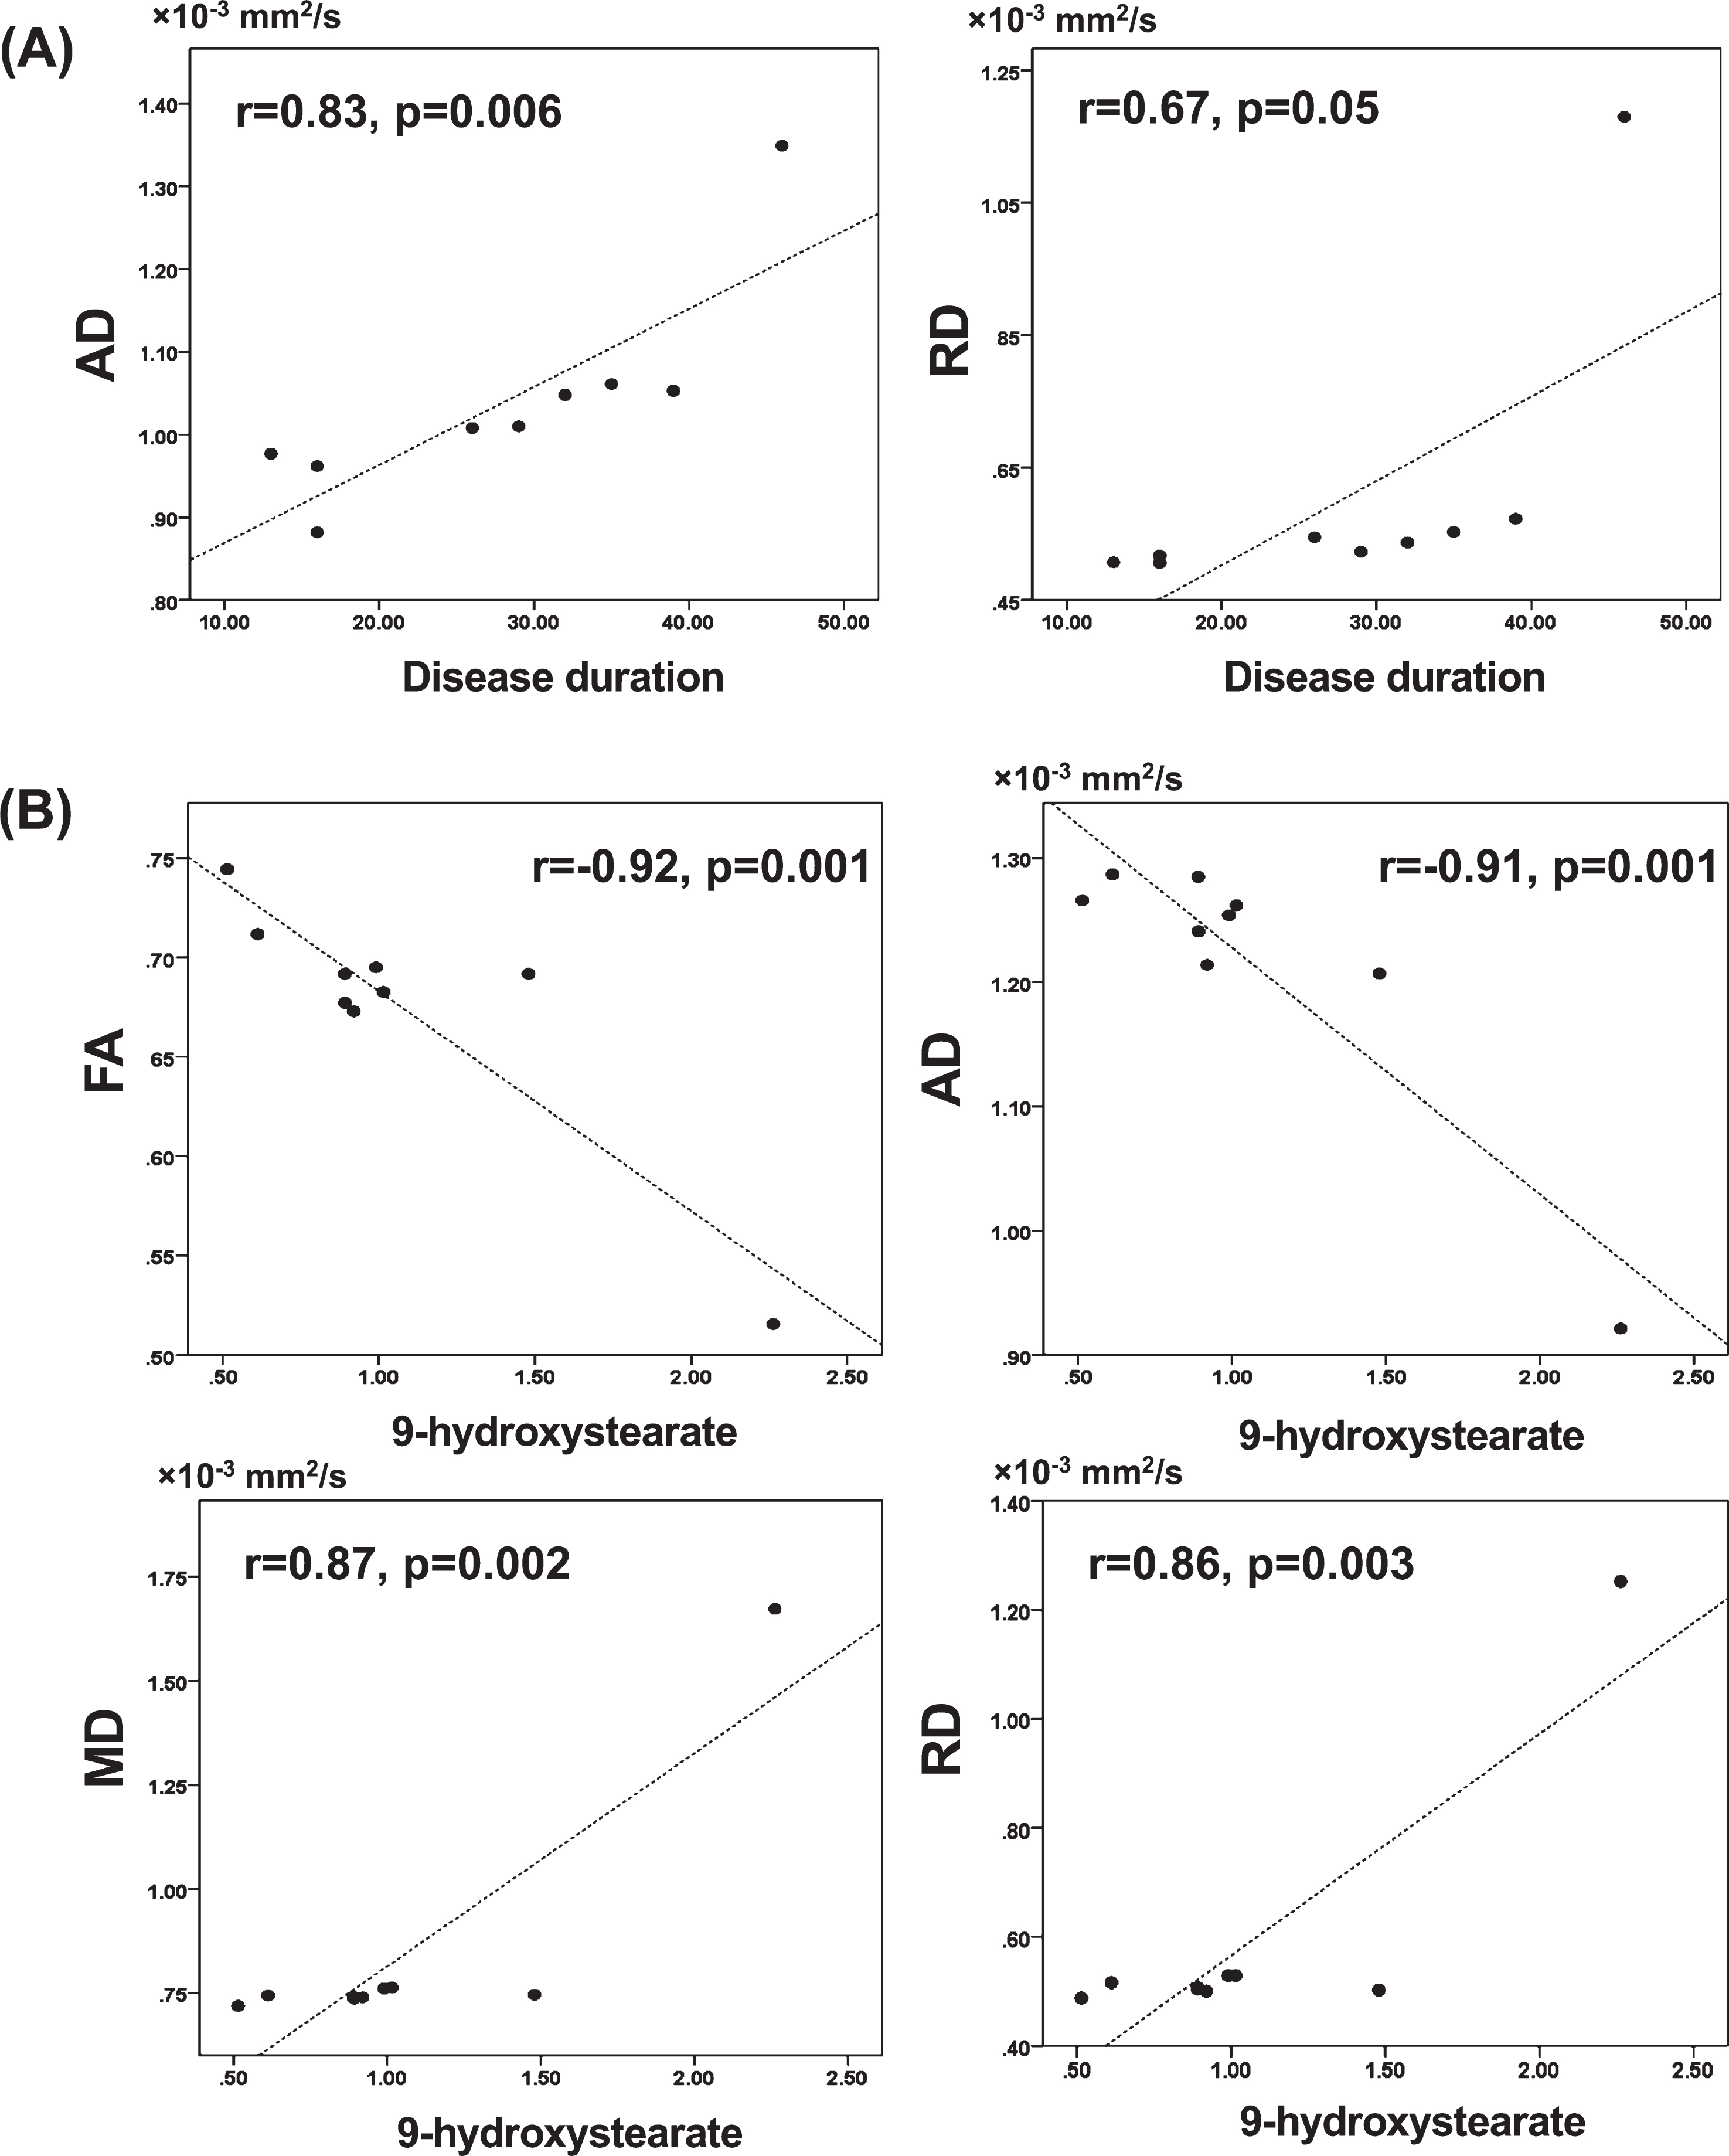 Scatter plots showing the correlation between the mean values of diffusion tensor imaging measures of the whole cluster in ROI analysis and disease duration (A) or 9-hydroxystearate (B). (A) There were significant positive correlations between AD or RD and disease duration. (B) There were significant negative correlations between FA or AD and 9-hydroxystearate, and significant positive correlations between MD or RD and 9-hydroxystearate. AD, axial diffusivity; FA, fractional anisotropy; MD, mean diffusivity; RD, radial diffusivity; ROI, region of interest.